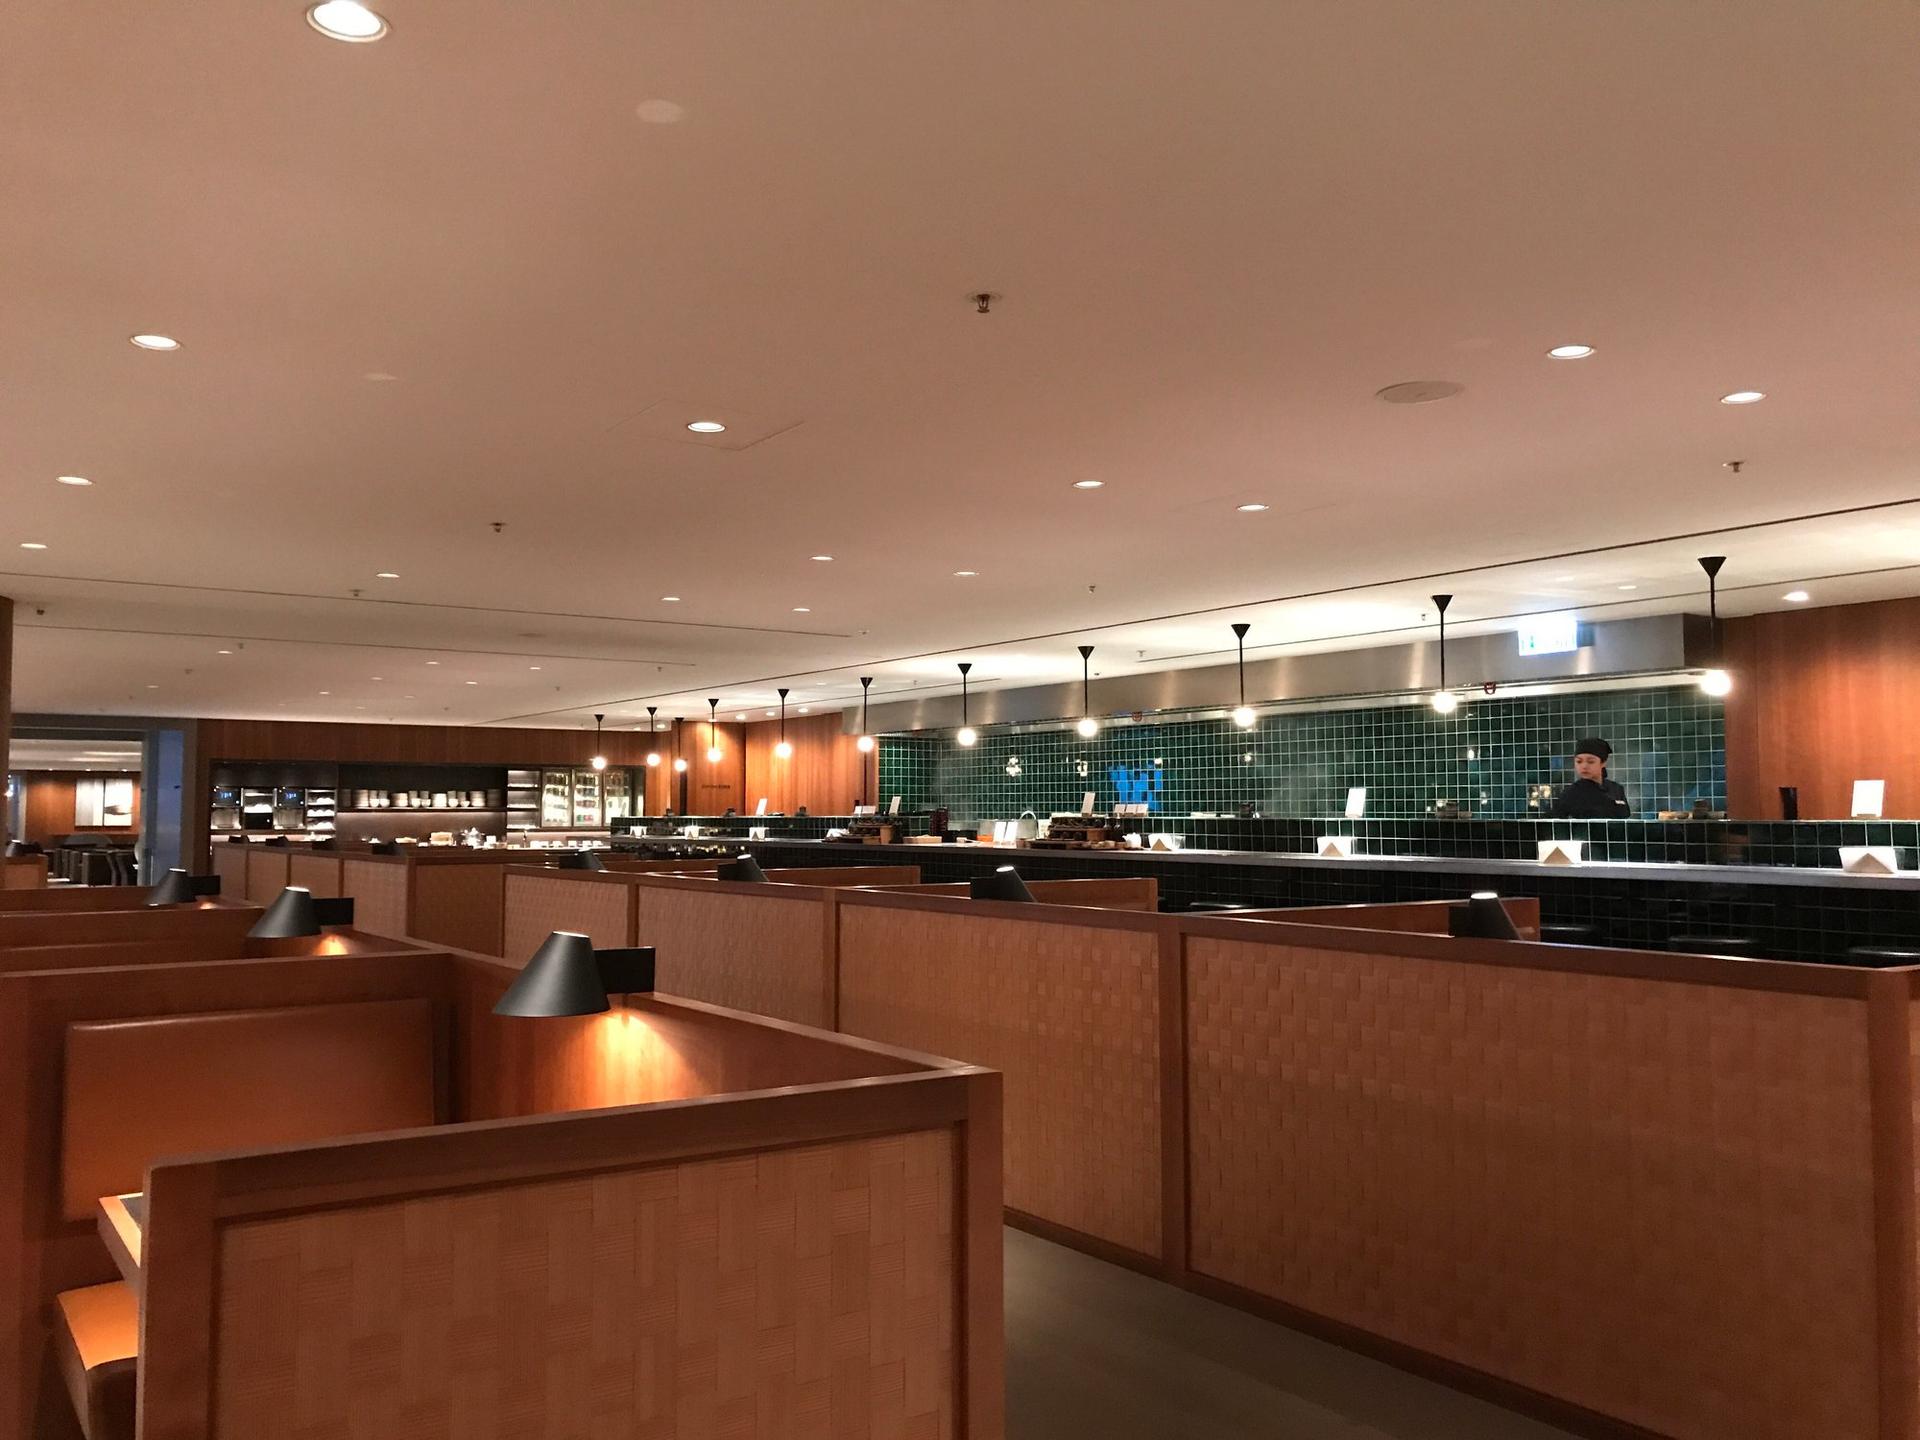 Cathay Pacific The Pier Business Class Lounge image 50 of 61